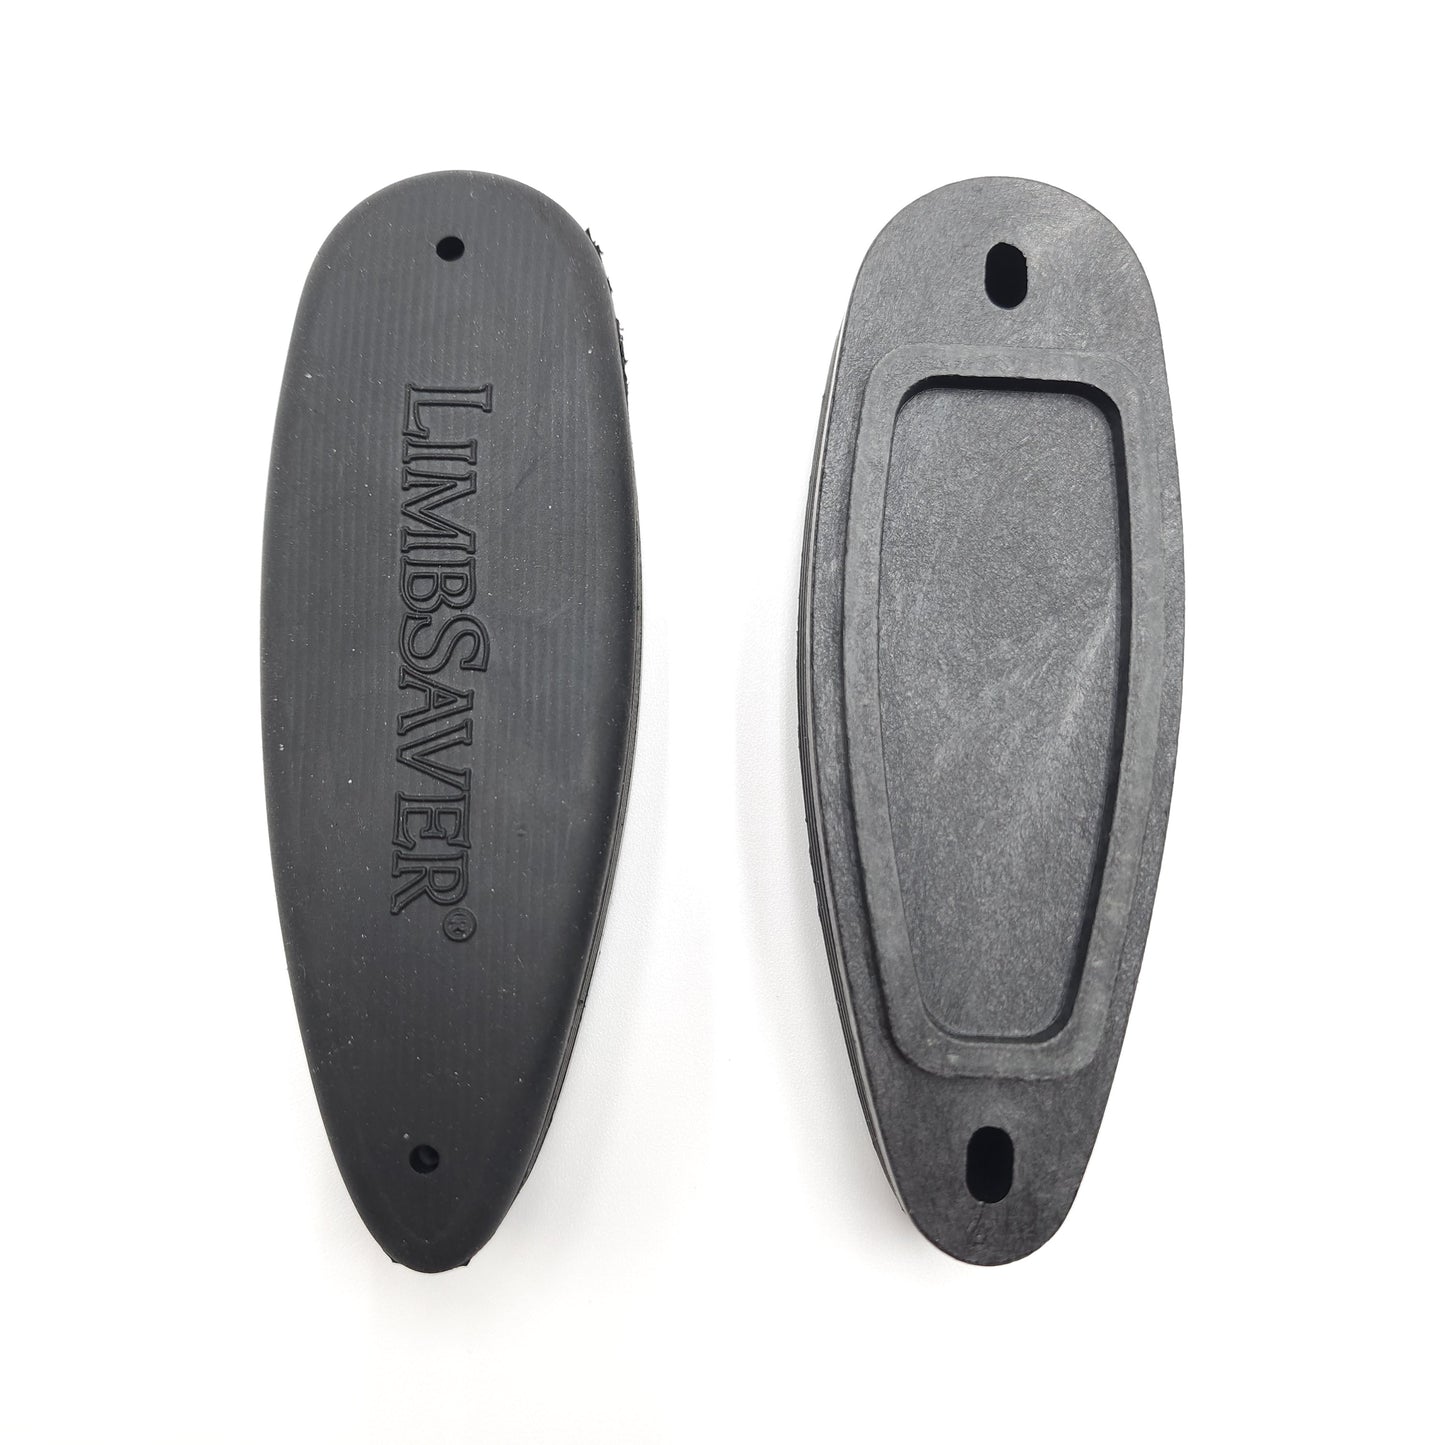 Benelli M4 Recoil Pad for Polymer Stocks